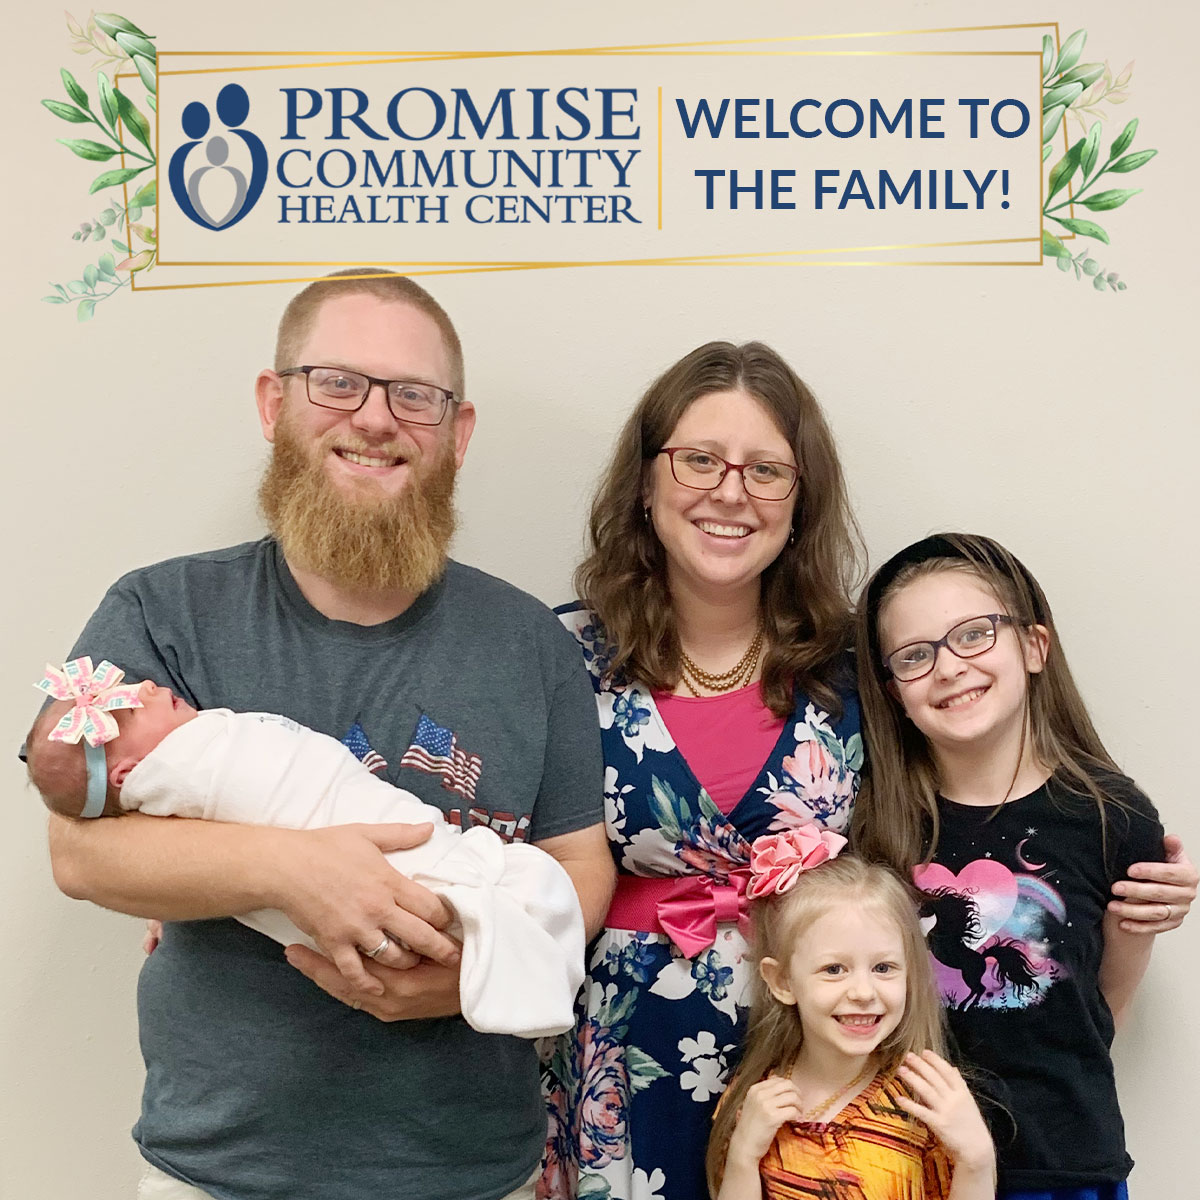 Homebirth in Sioux City, Iowa |Promise Community Health Center in Sioux Center, Iowa | Home births in northwest Iowa, Home births in southeast South Dakota, Home births in southwest Minnesota | Home births in Sioux Falls South Dakota, Home births in Beresford South Dakota, Home births in Sioux City IA, Home births in LeMars IA, Home births in Worthington MN, Home births in Iowa, Home births in South Dakota, Home births in Minnesota